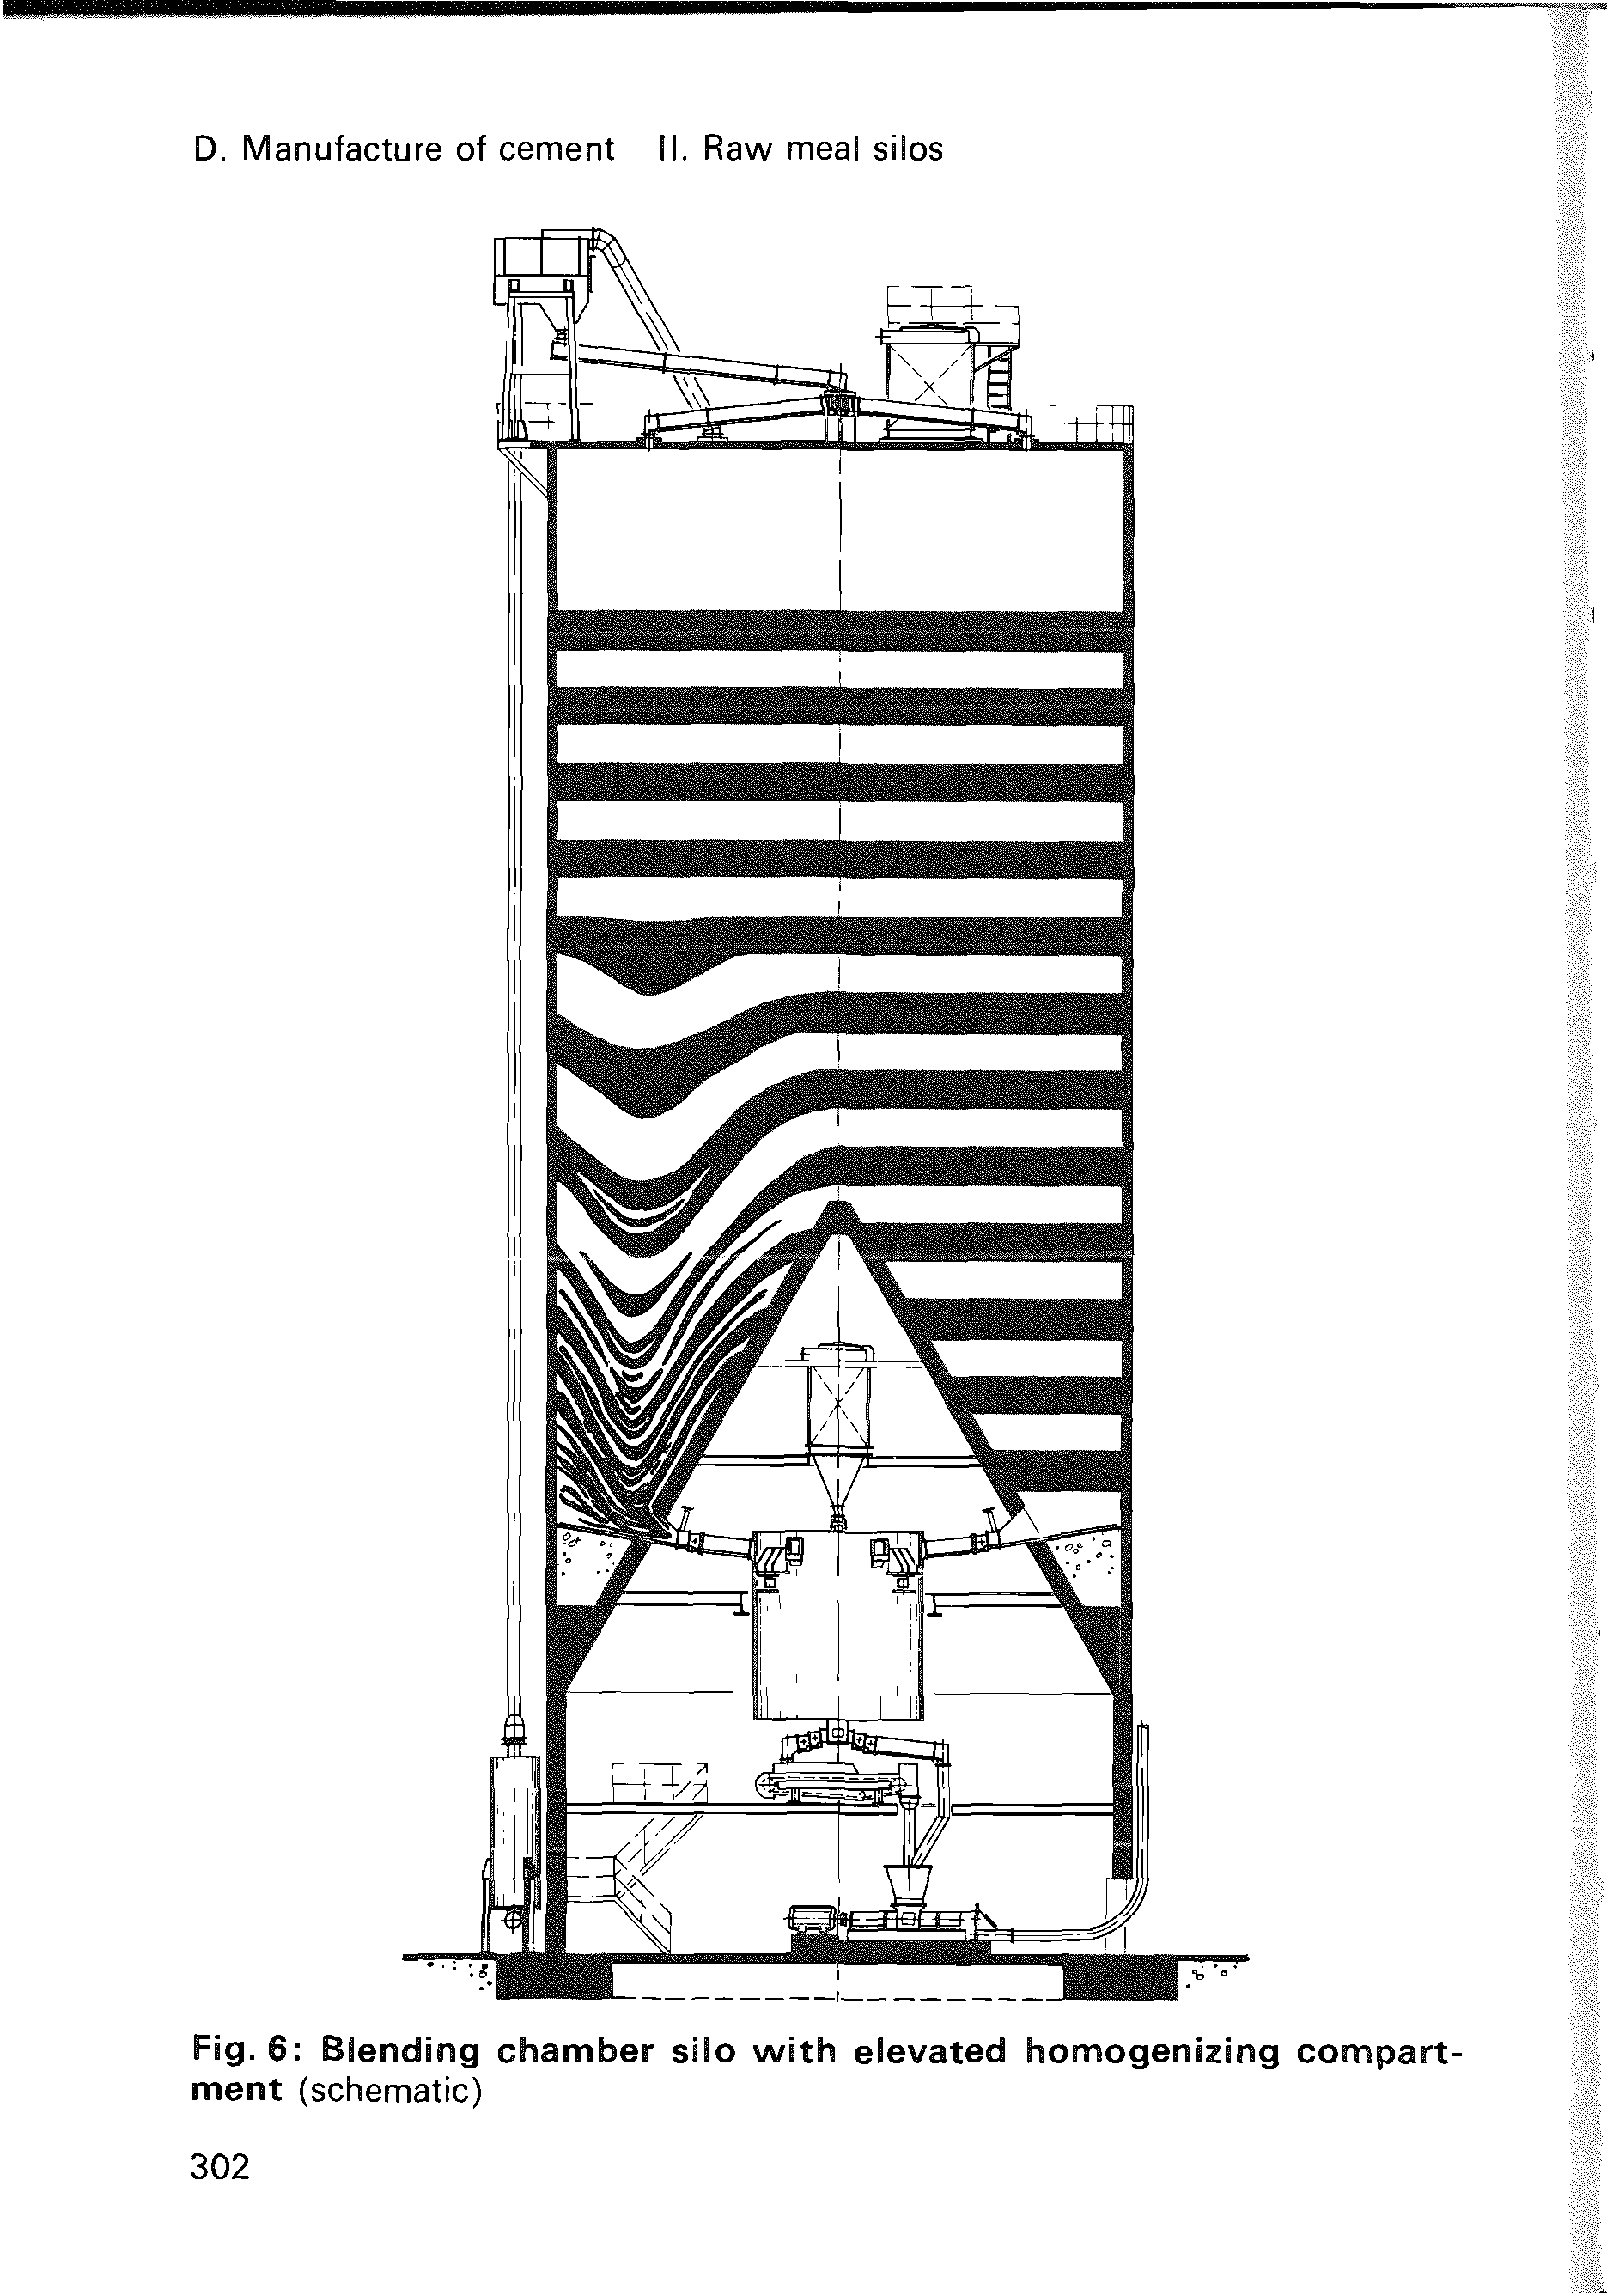 Fig. 6 Blending chamber silo with elevated homogenizing compartment (schematic)...